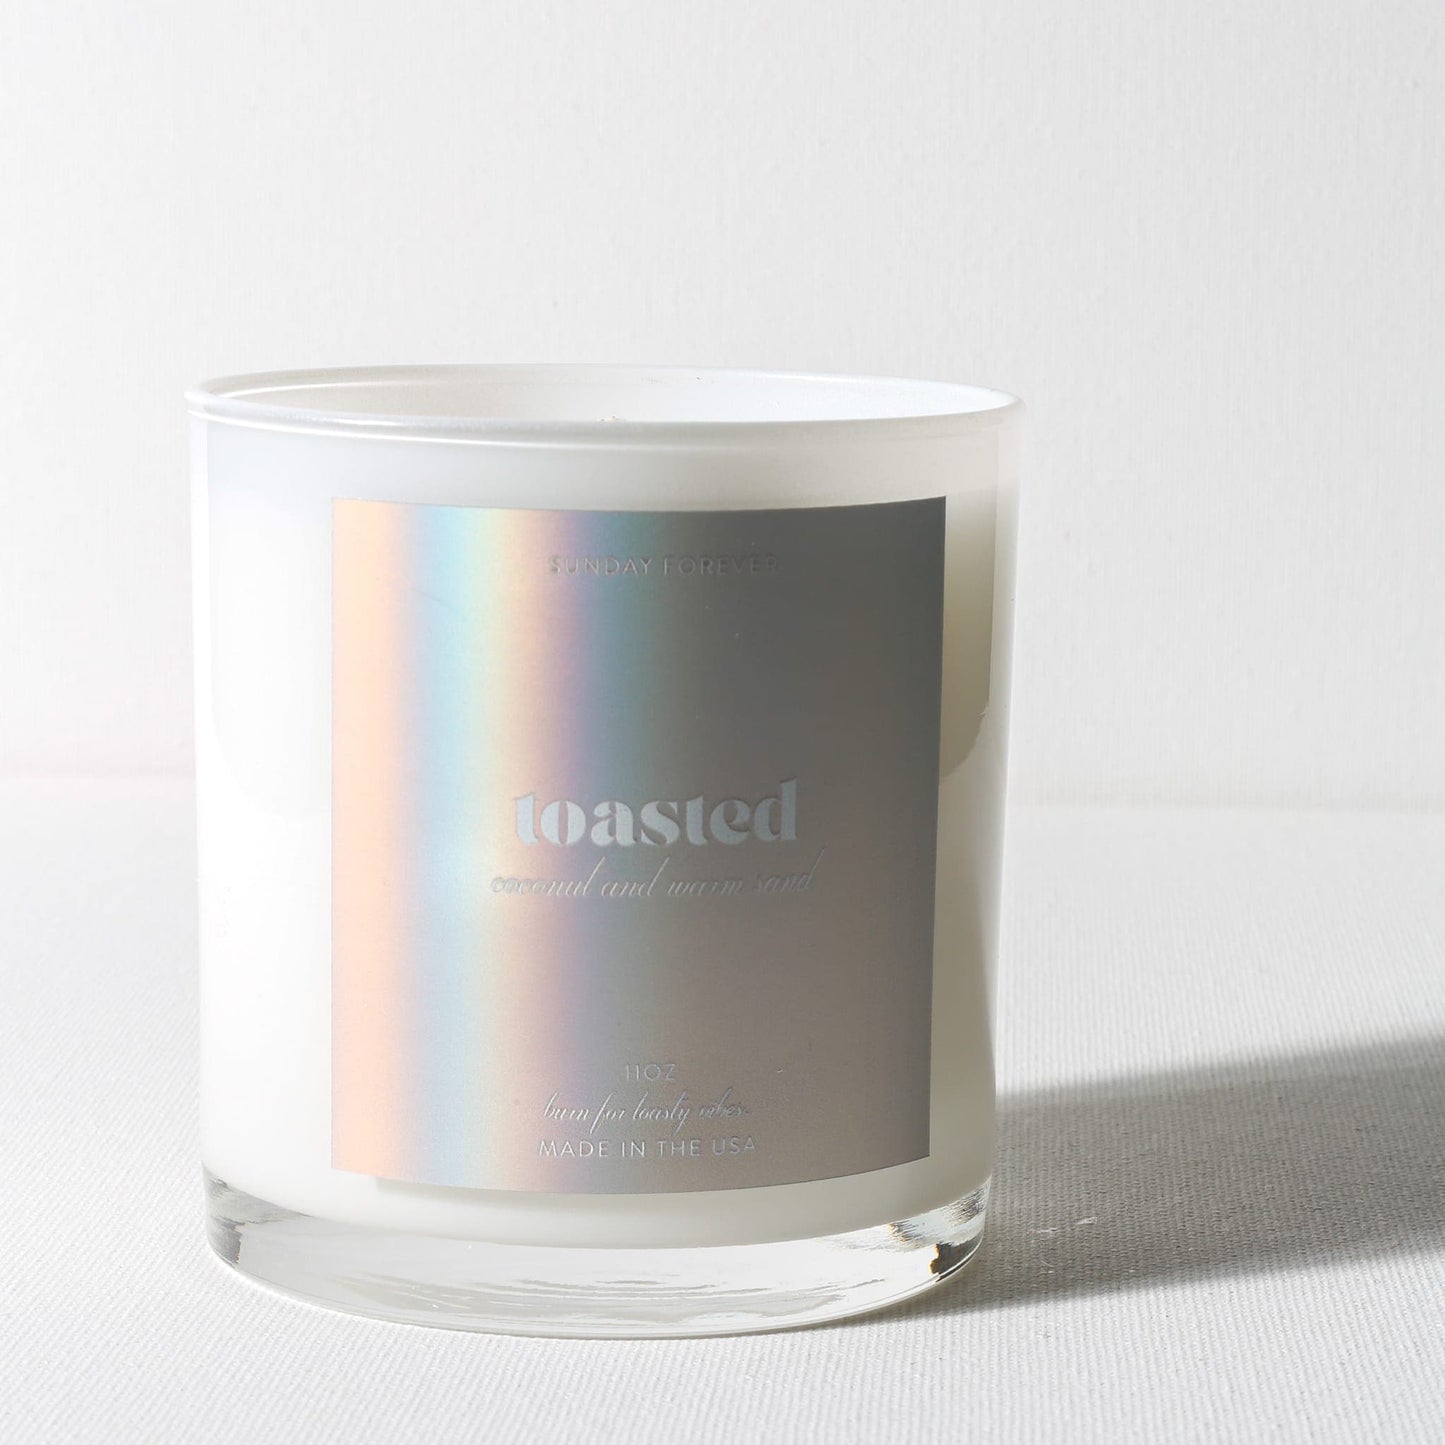 Sunday Forever Candles Toasted Luxury Candle with Coconut and Warm Sand